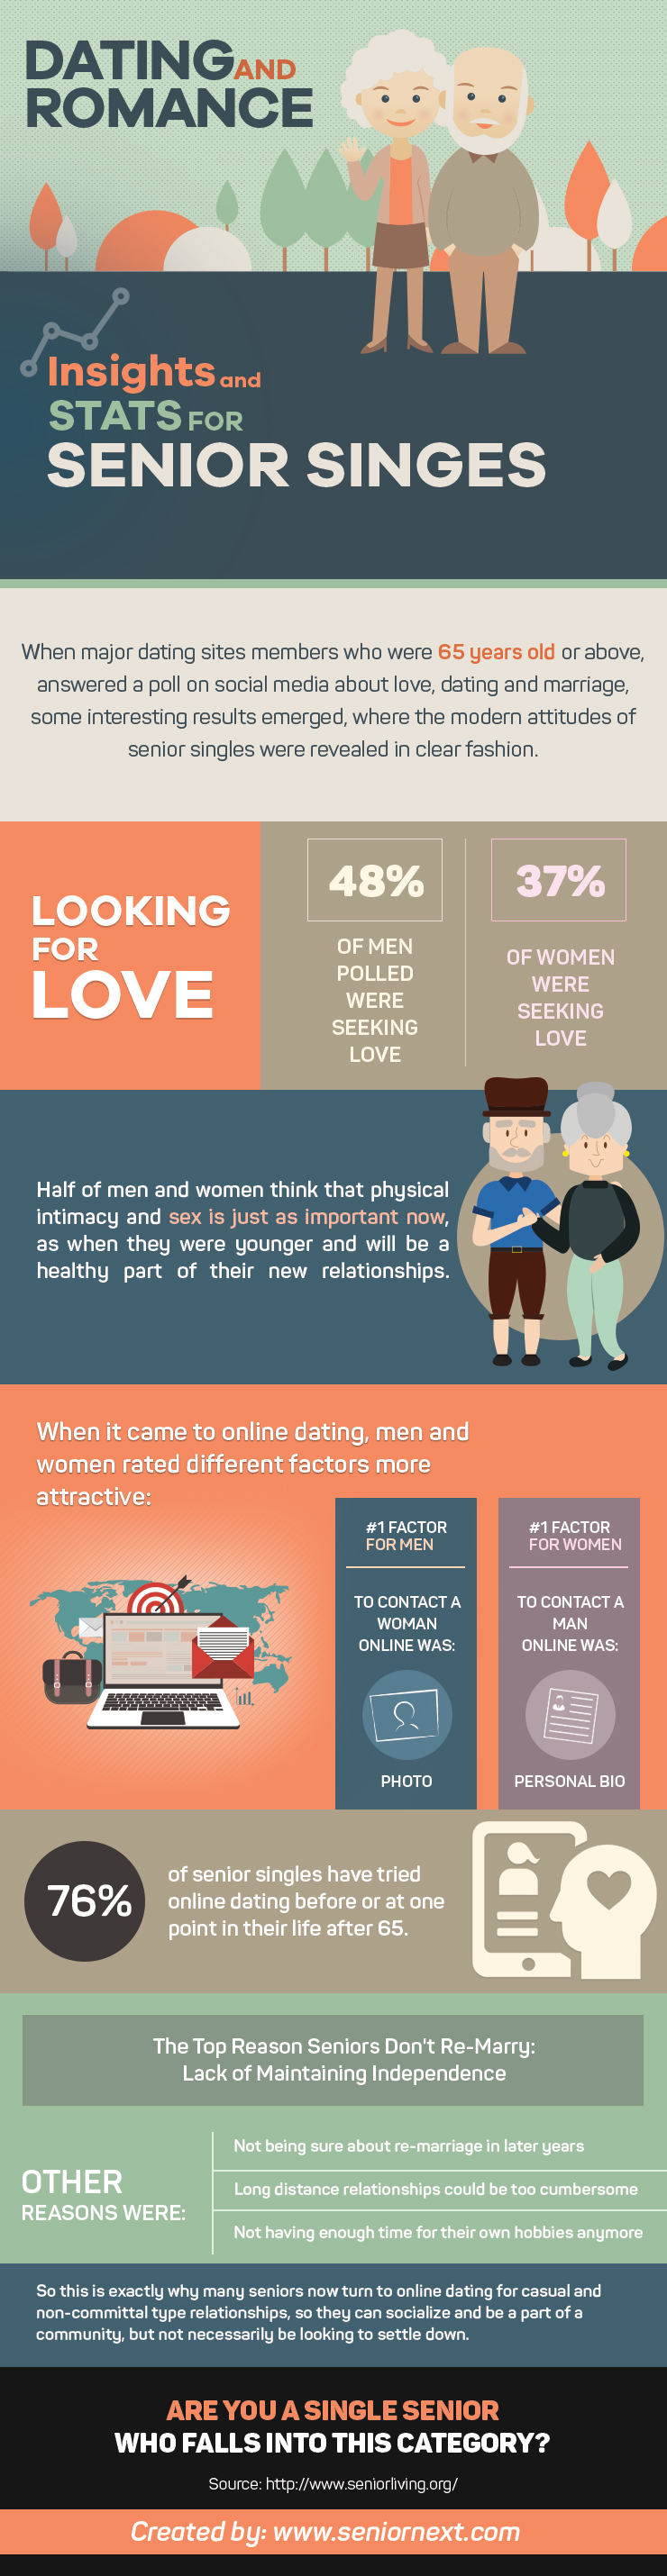 Dating and Romance Insights and Stats for Senior Singles